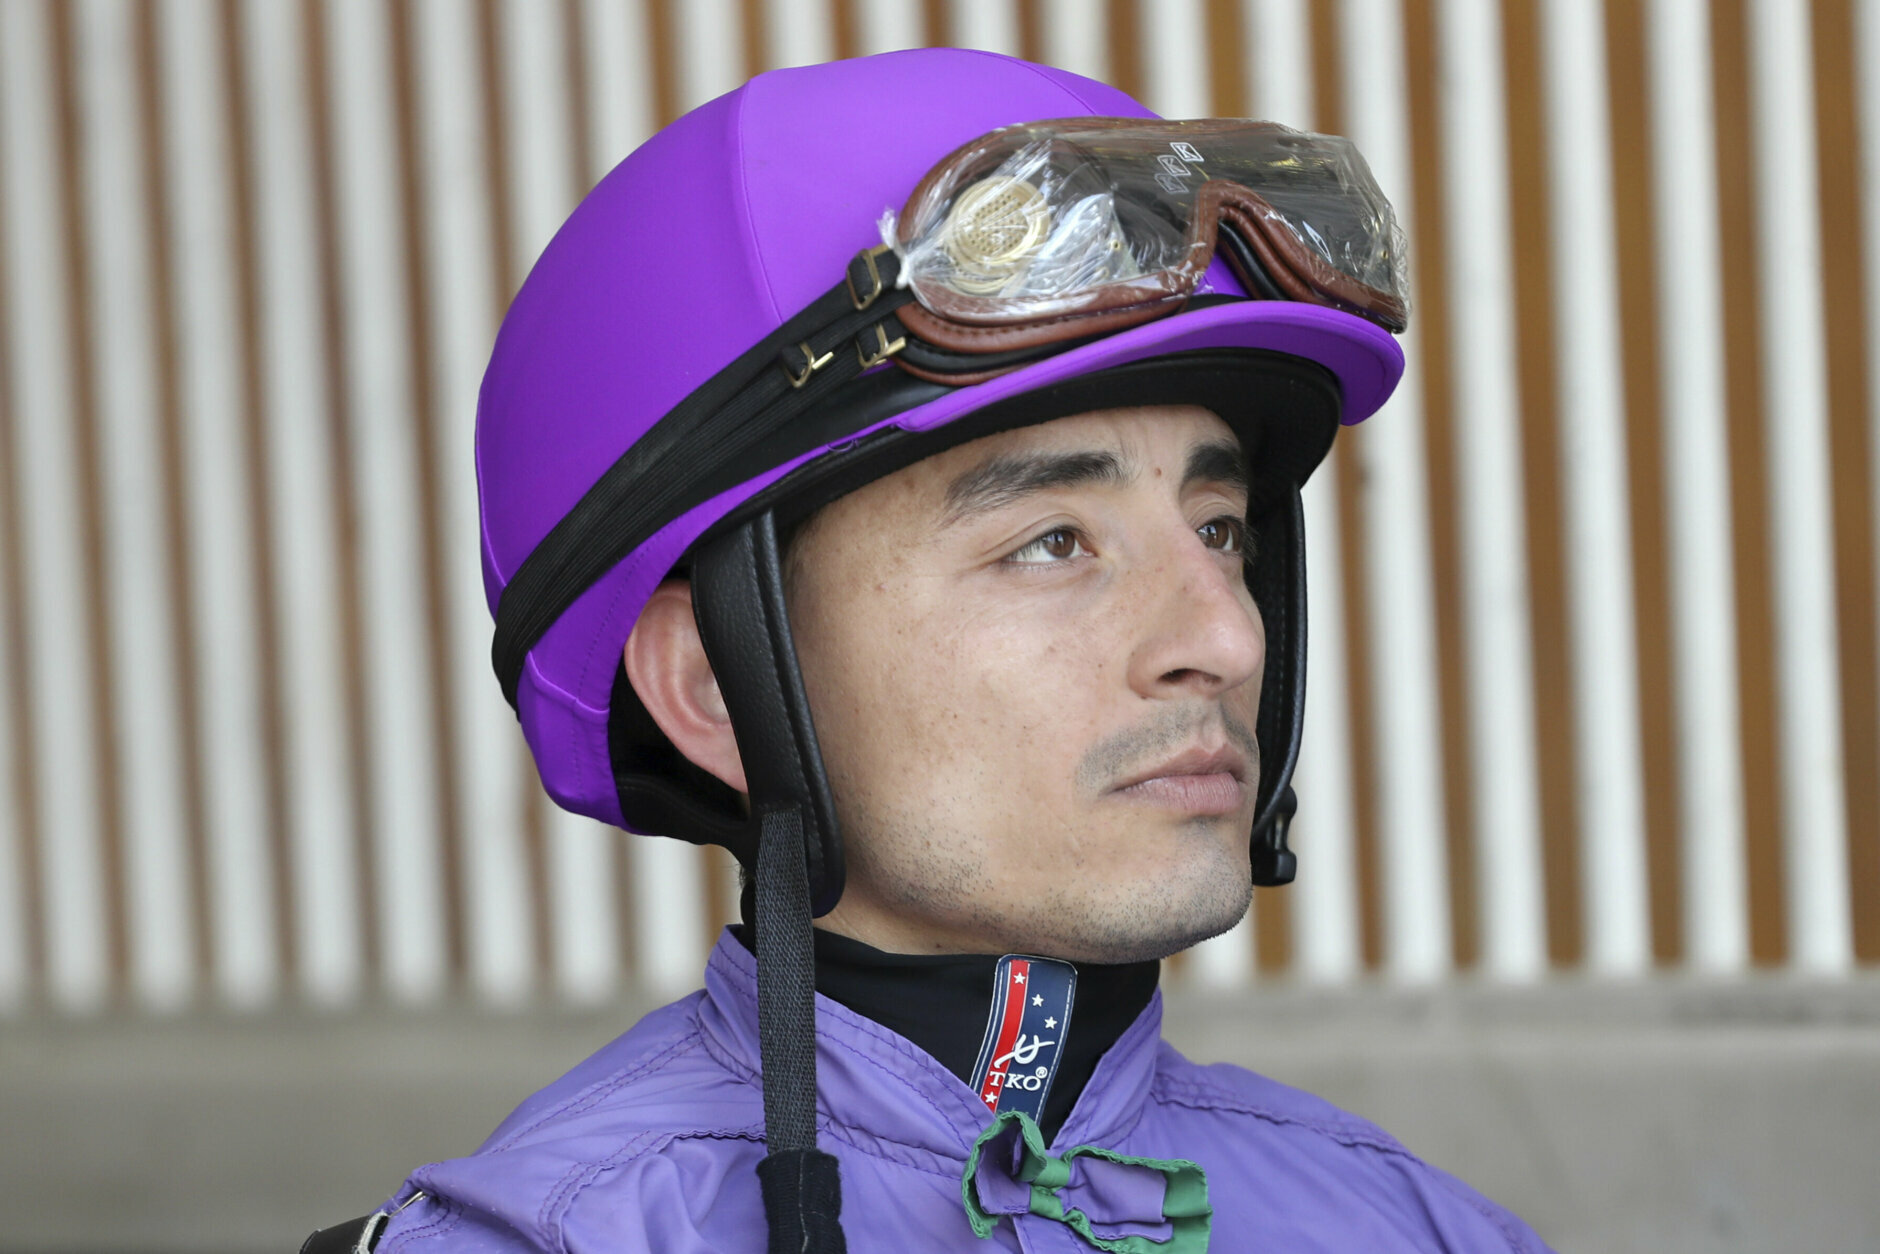 Jockey Gabriel Saez is seen at Churchill Downs Thursday, May 2, 2019, in Louisville, Ky. Saez will ride By My Standards in the 145th running of the Kentucky Derby is scheduled for Saturday, May 4. (AP Photo/Gregory Payan)